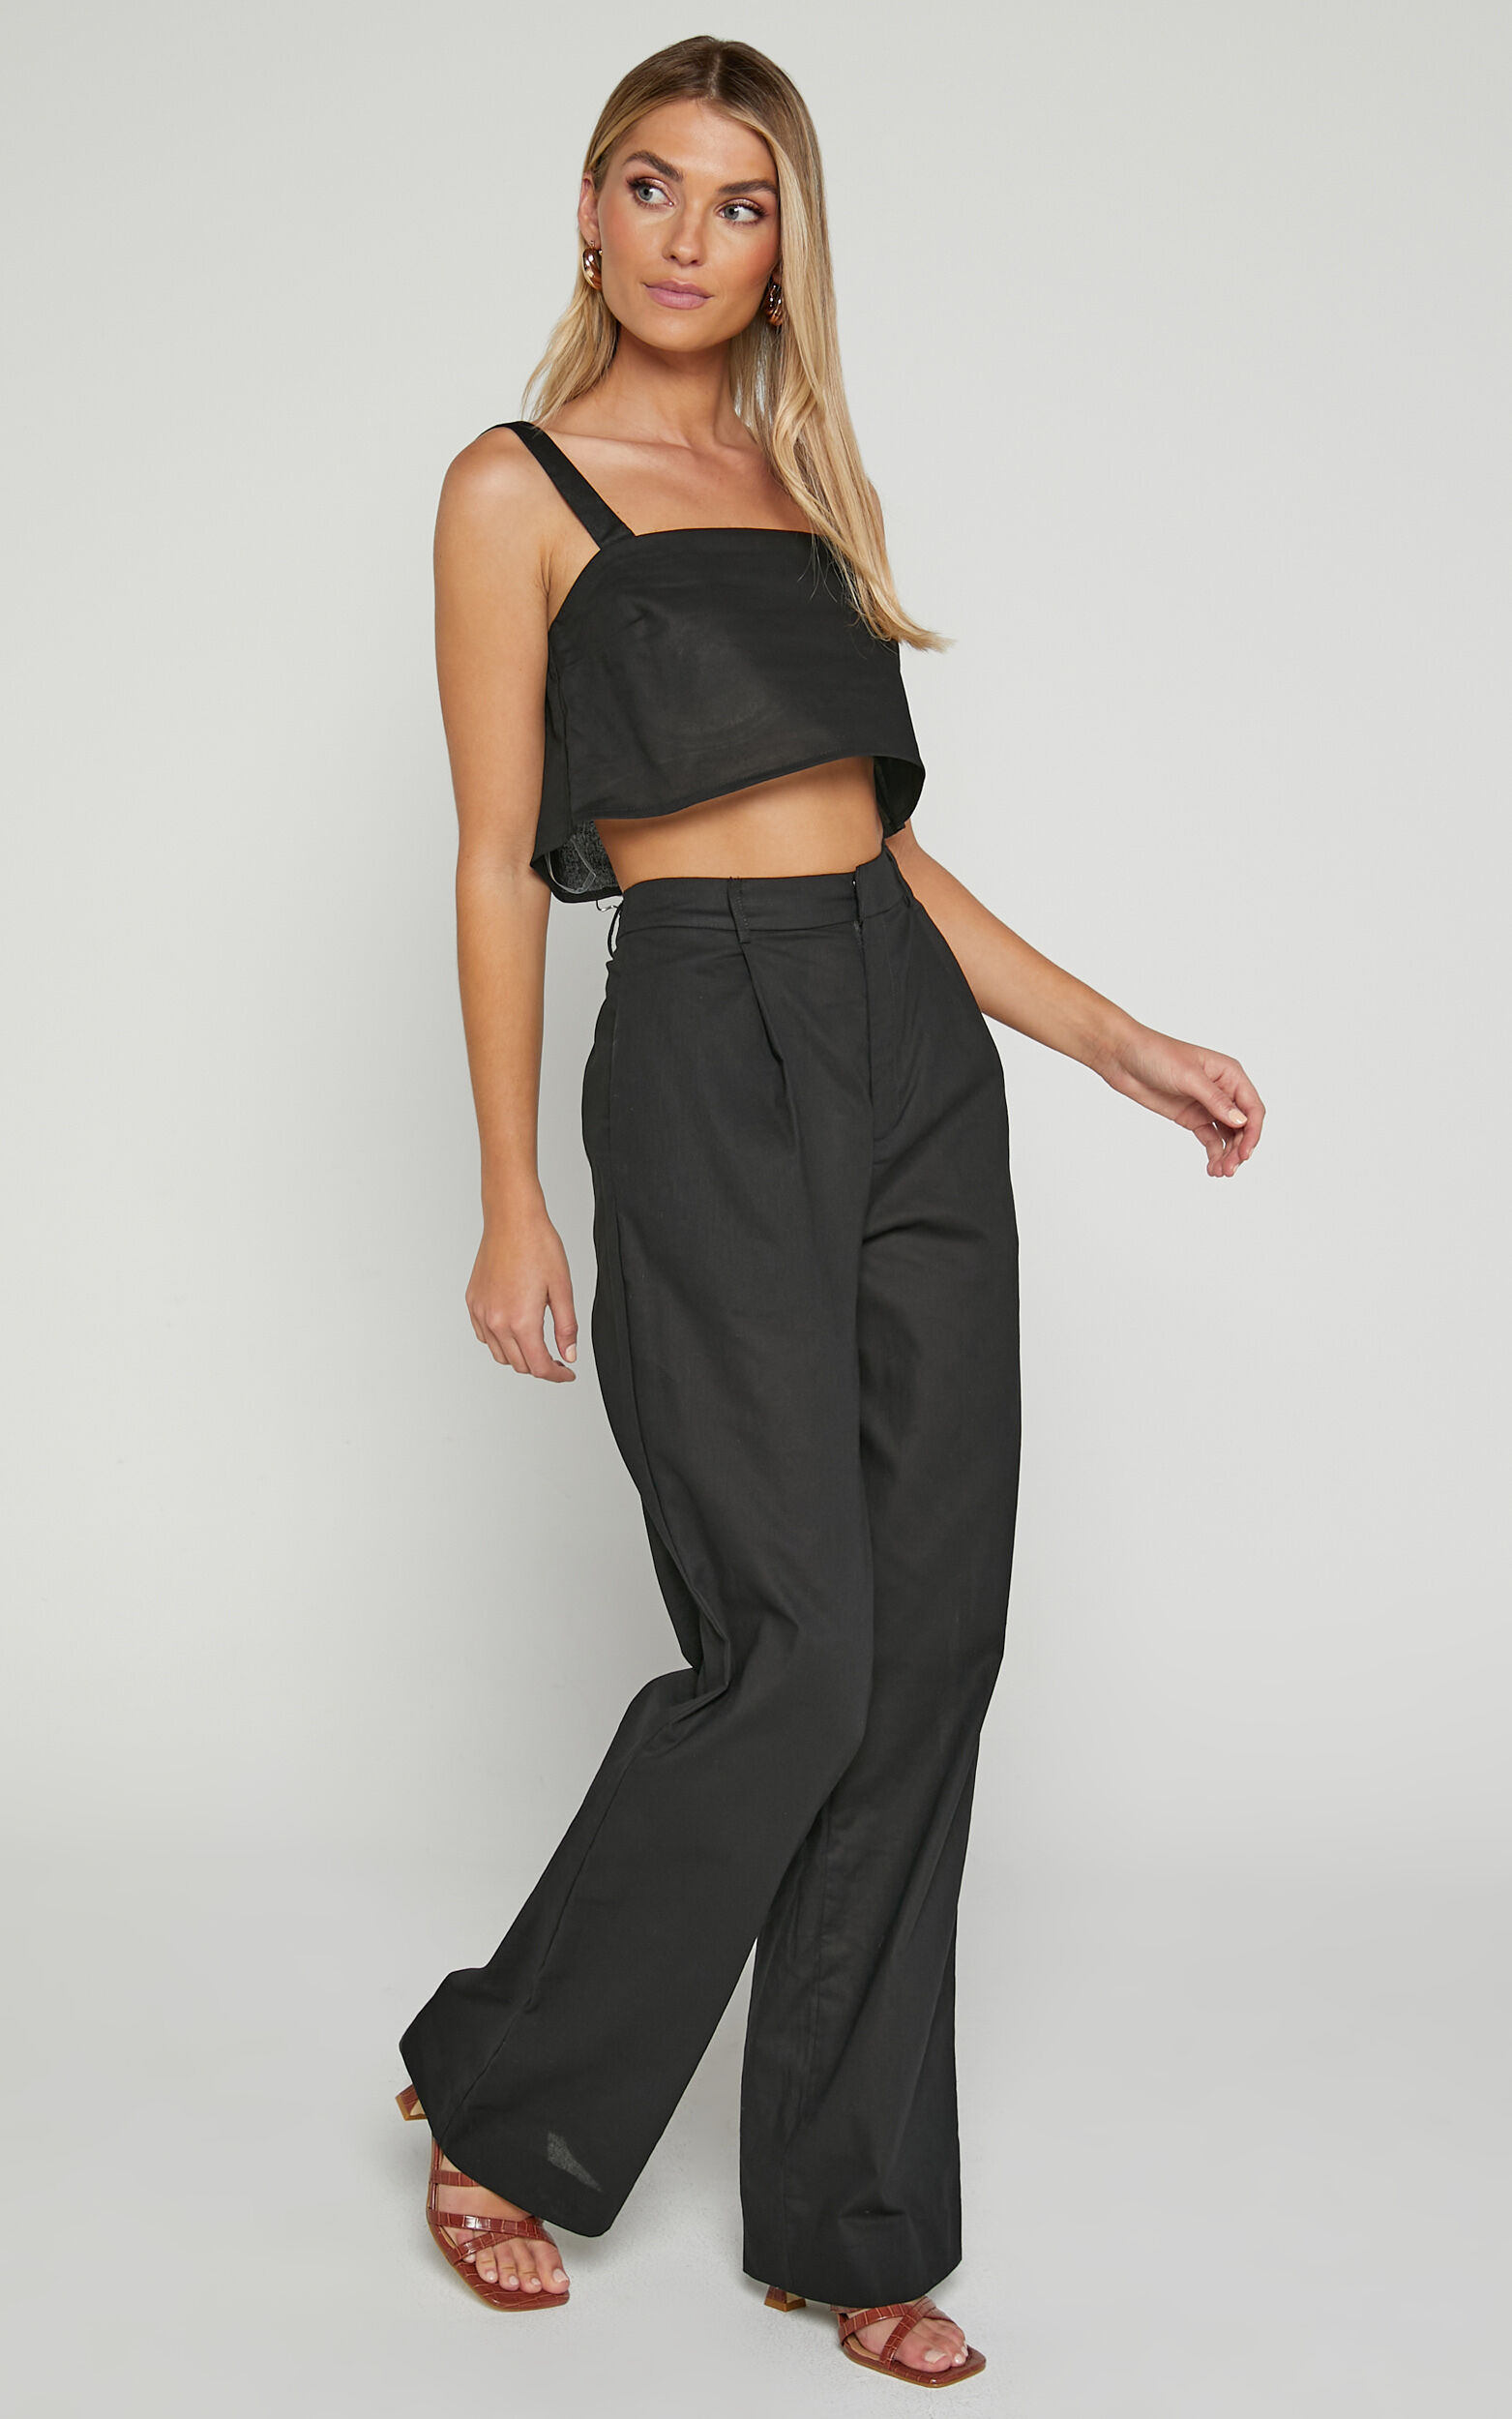 Claudina Two Piece Set - Cropped Cami Top and Relaxed Pants Set in Black